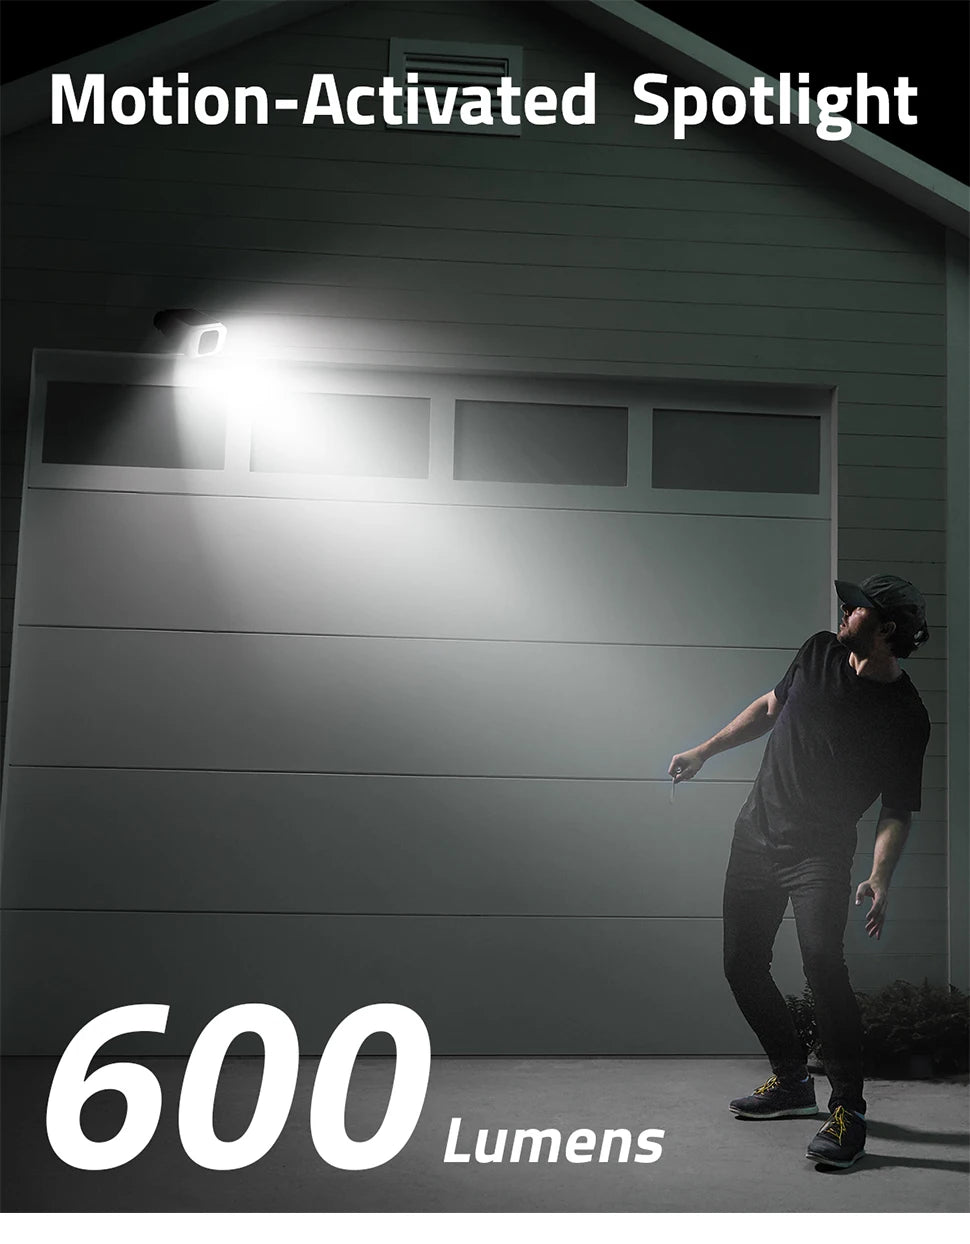 Eufy S40 Security SoloCam, Motion-activated spotlight with 600 lumens for enhanced outdoor visibility.